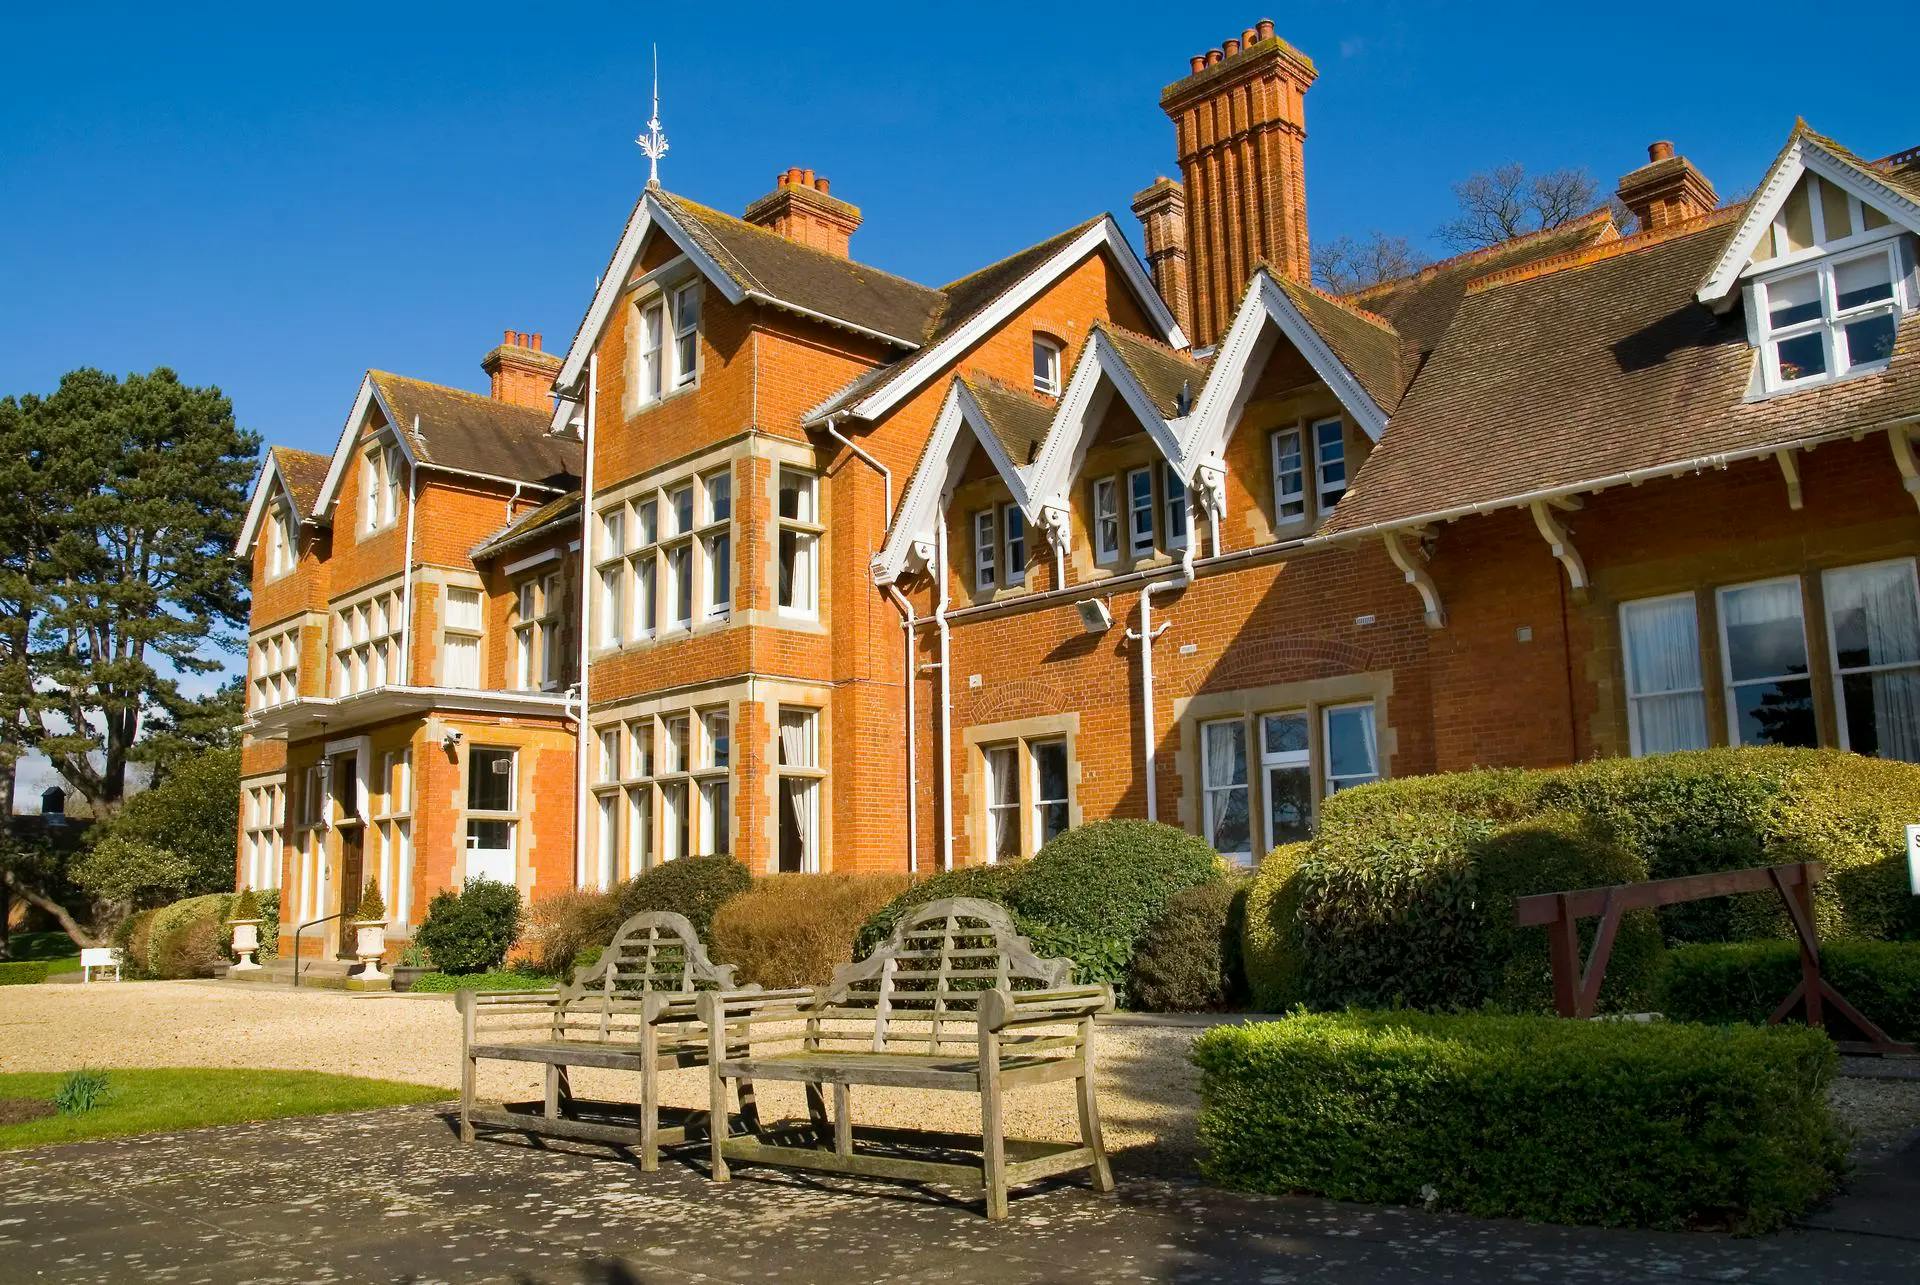 Exterior of Oaken Holt care home in Oxford, Oxfordshire